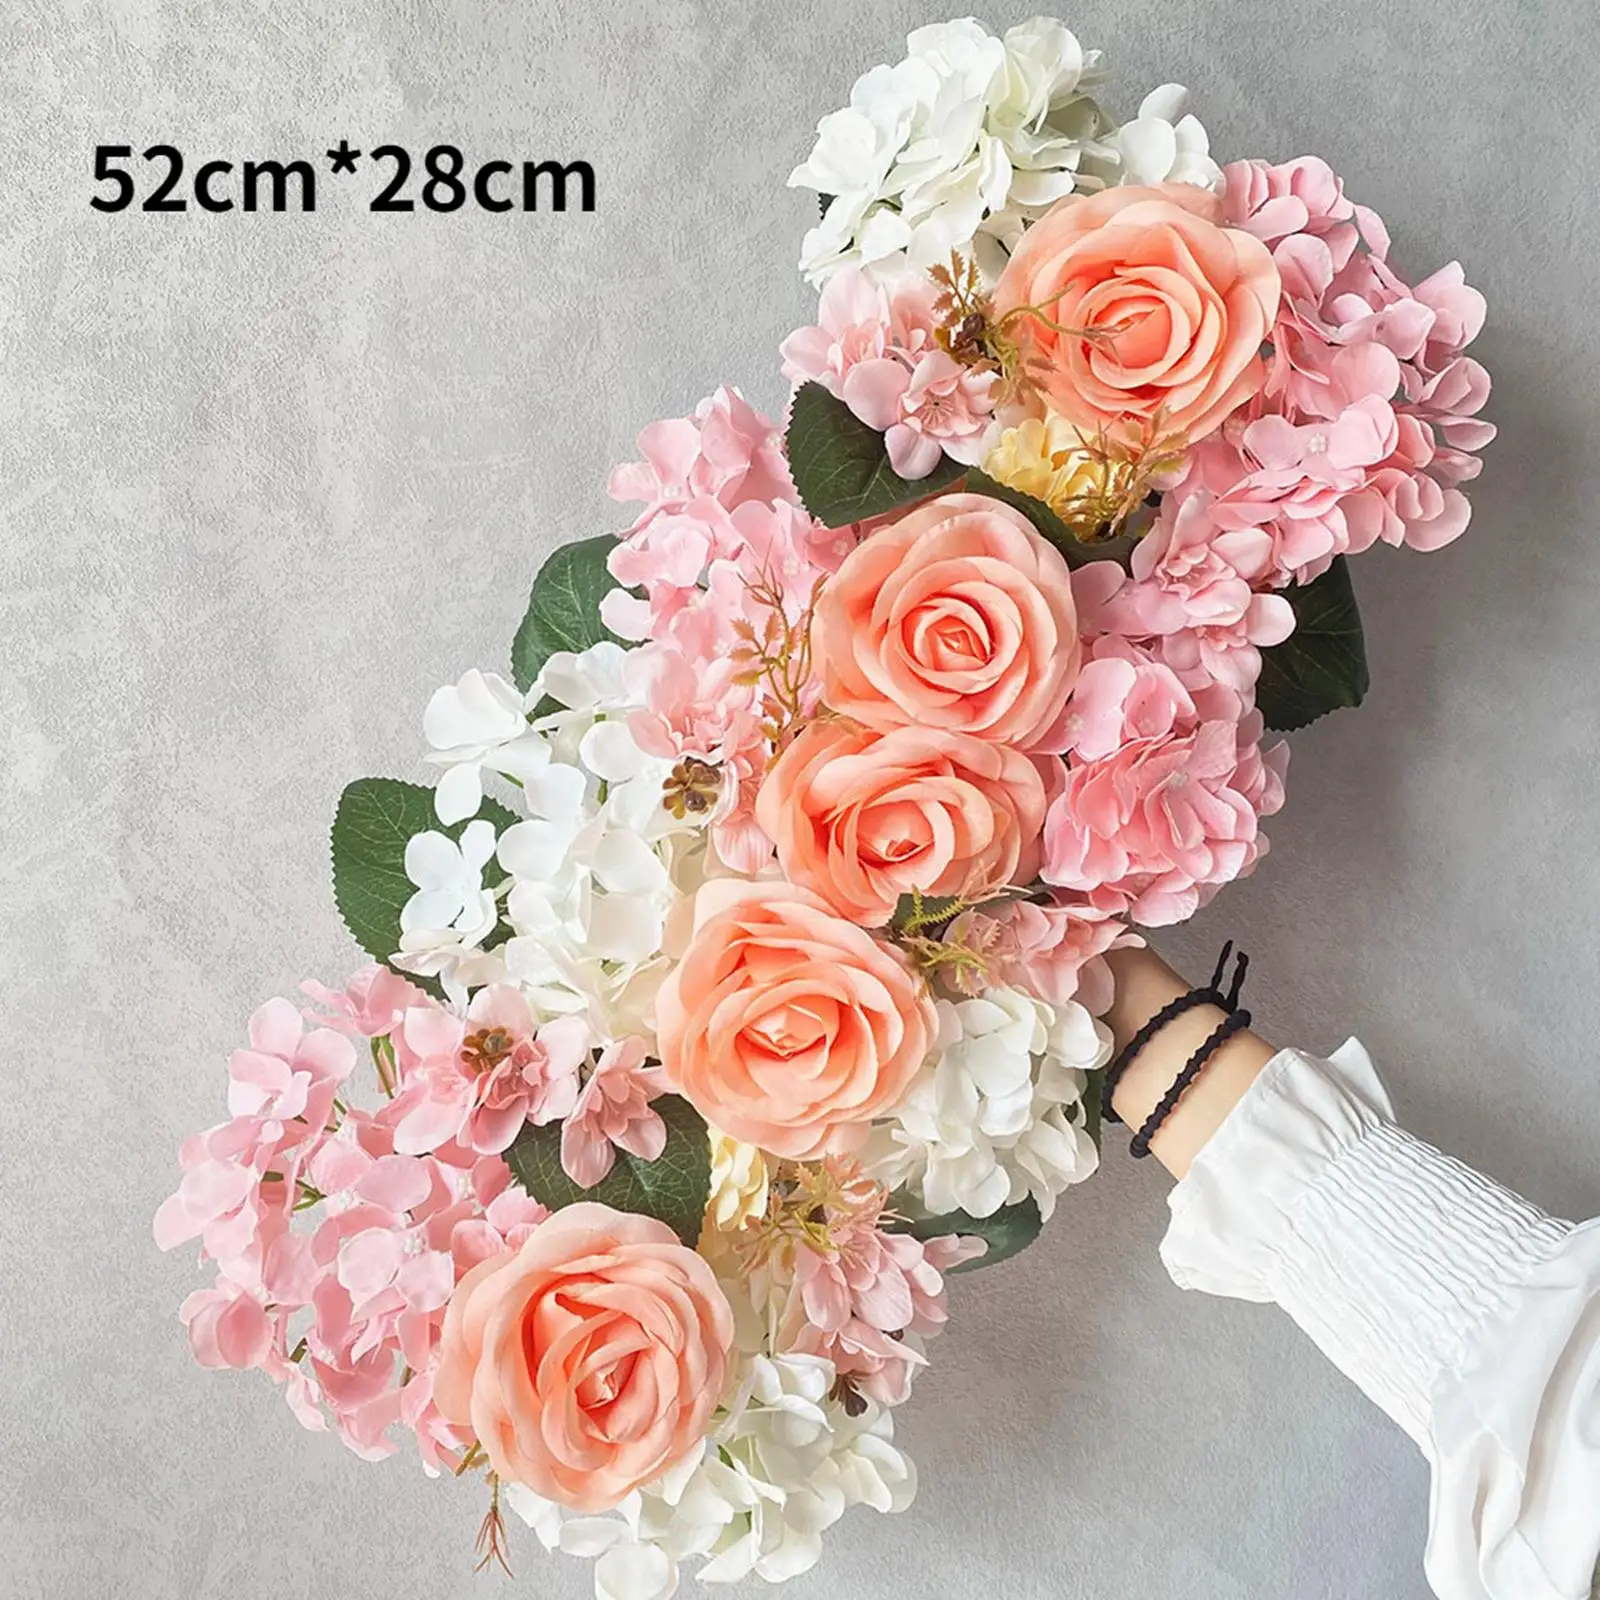 Realistic Flowers Panels Wedding Arch Flowers for Front Door Event Backdrop